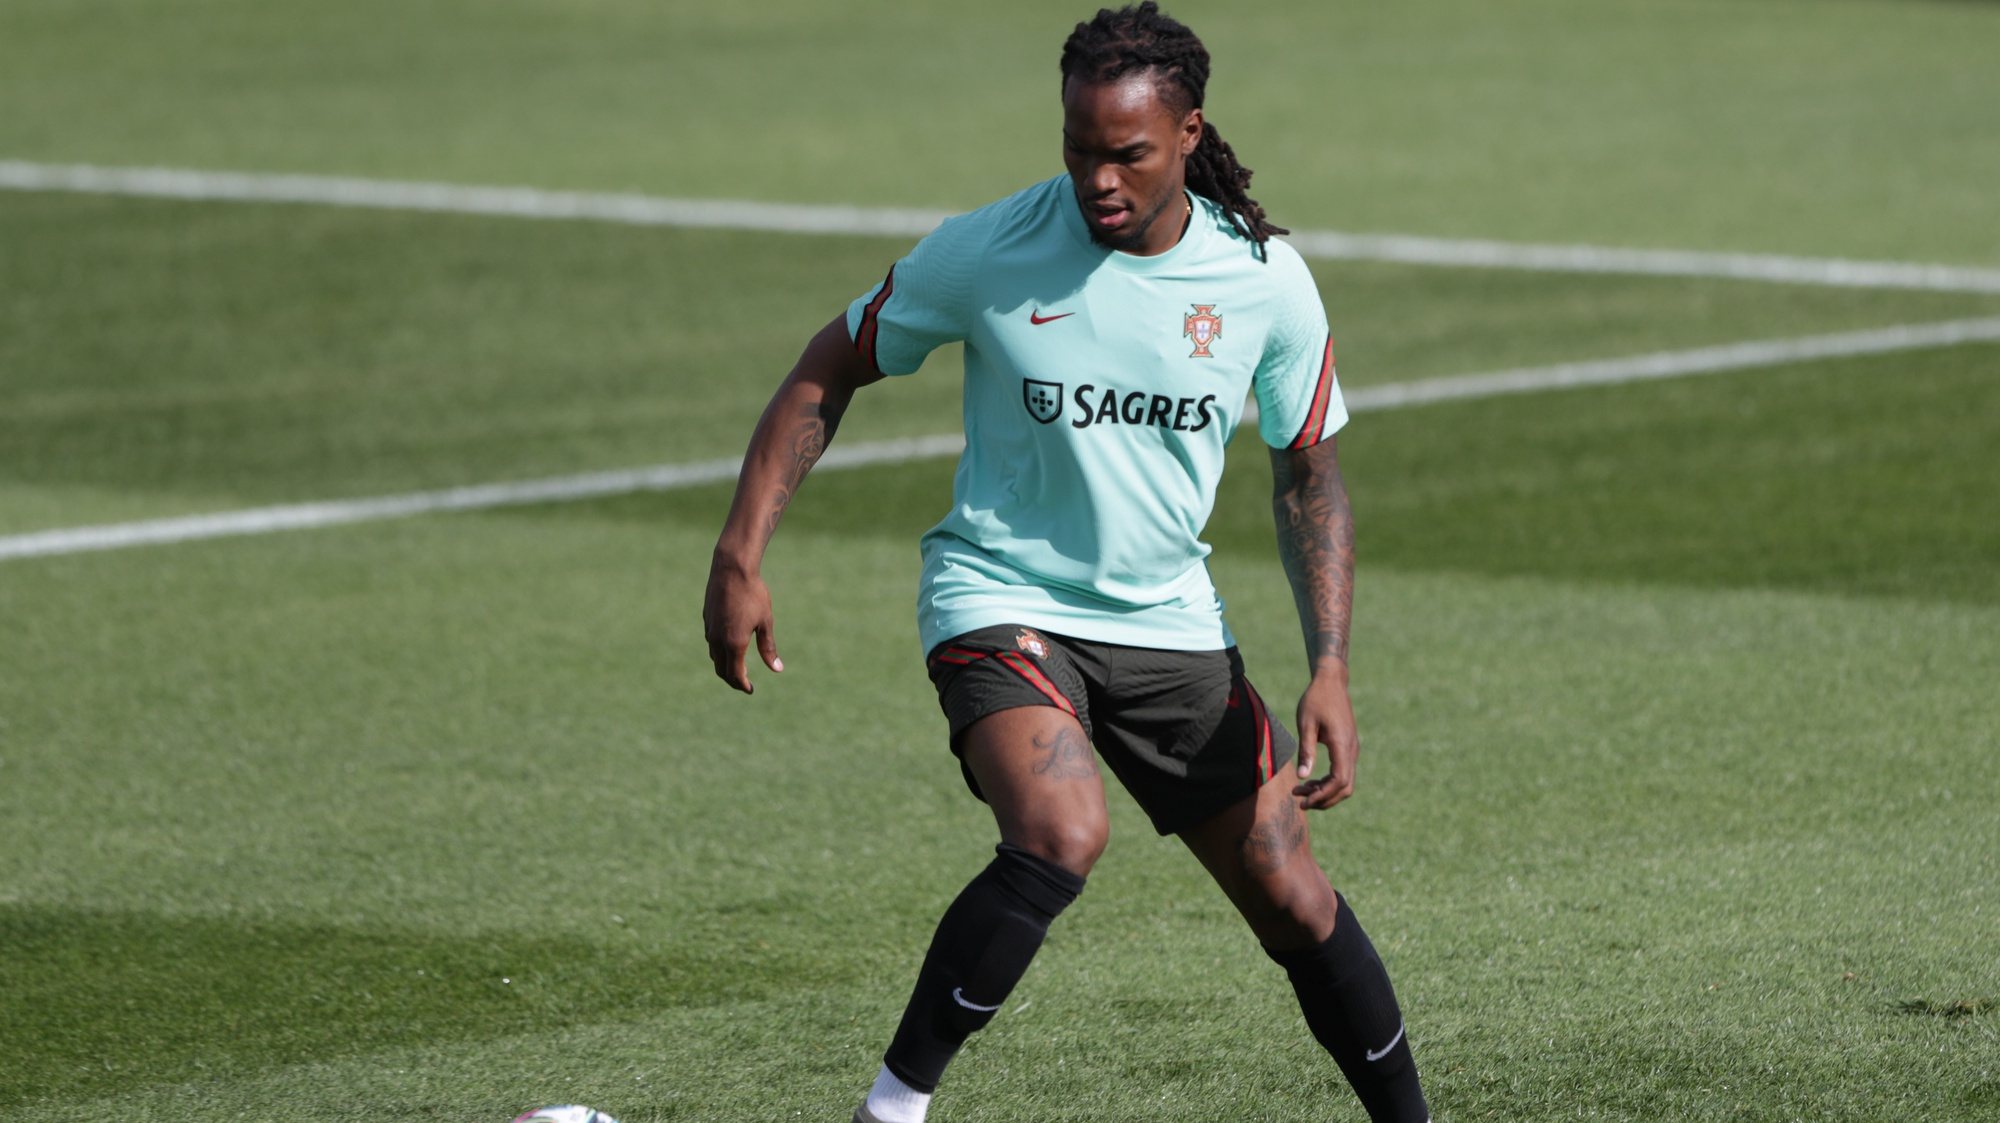 epa09231690 Portuguese soccer player Renato Sanches in action during a training session of the national soccer team in Oeiras, outskirts of Lisbon, Portugal, 27 May 2021.  EPA/TIAGO PETINGA